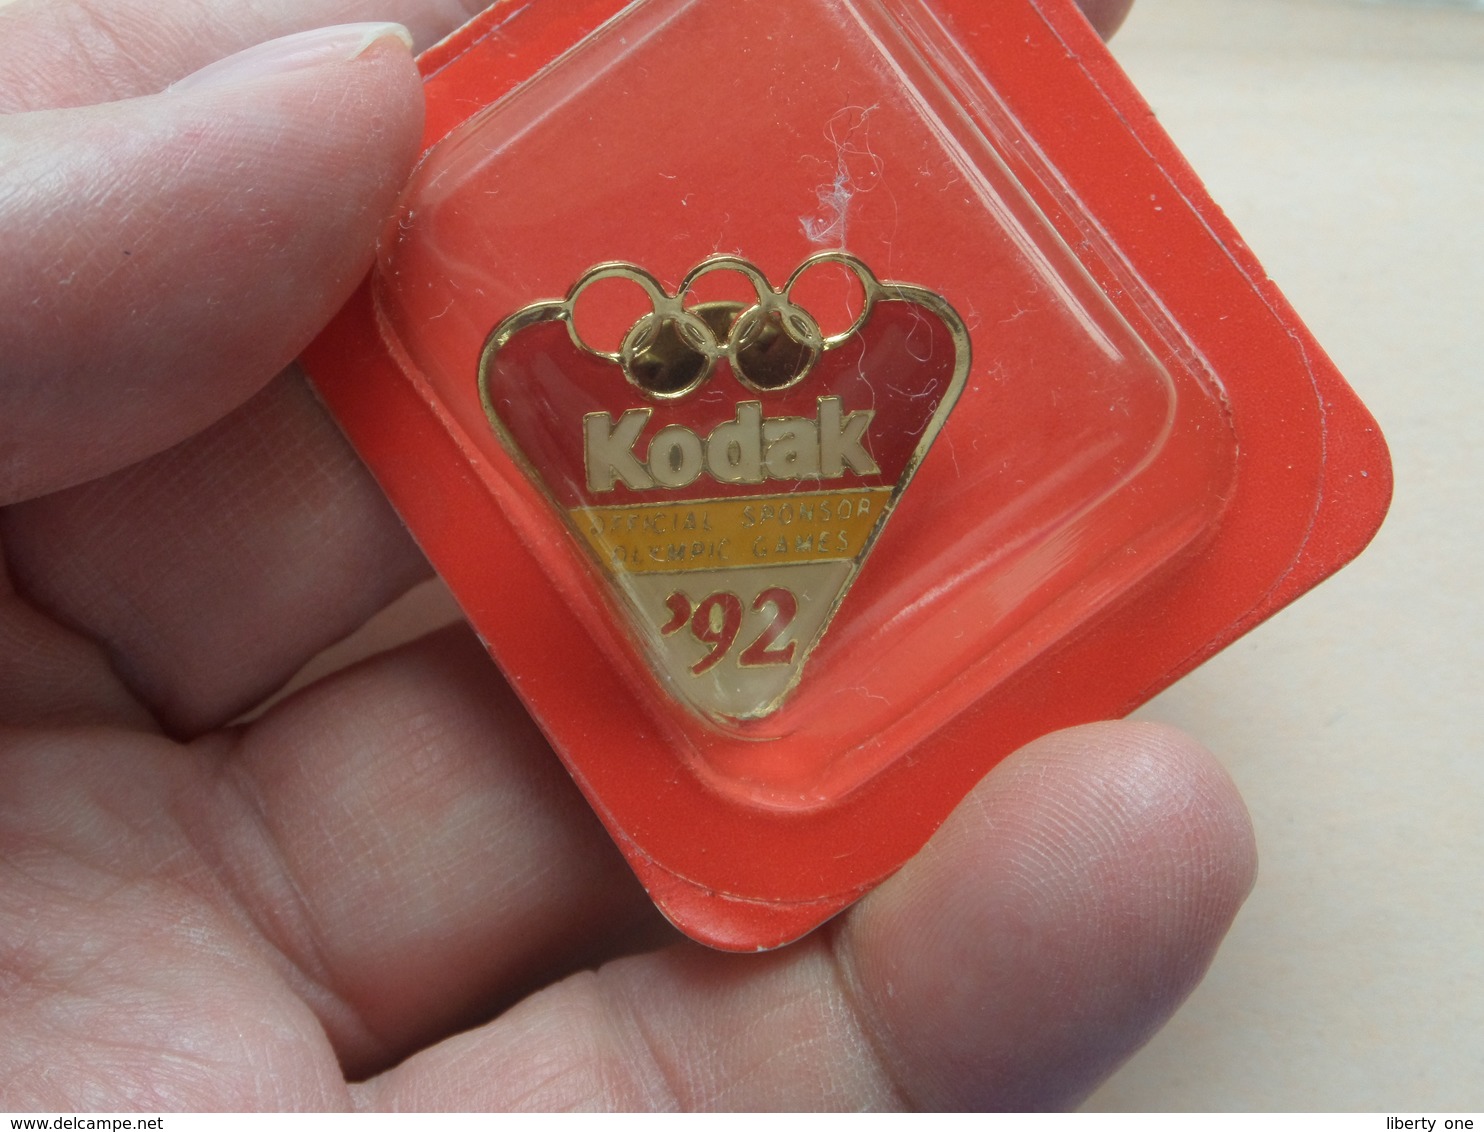 1992 - KODAK Official Sponsor Olympic Games '92 BARCELONA ( Zie Foto ) Pin - Brooch / Closed Box ! - Olympic Games